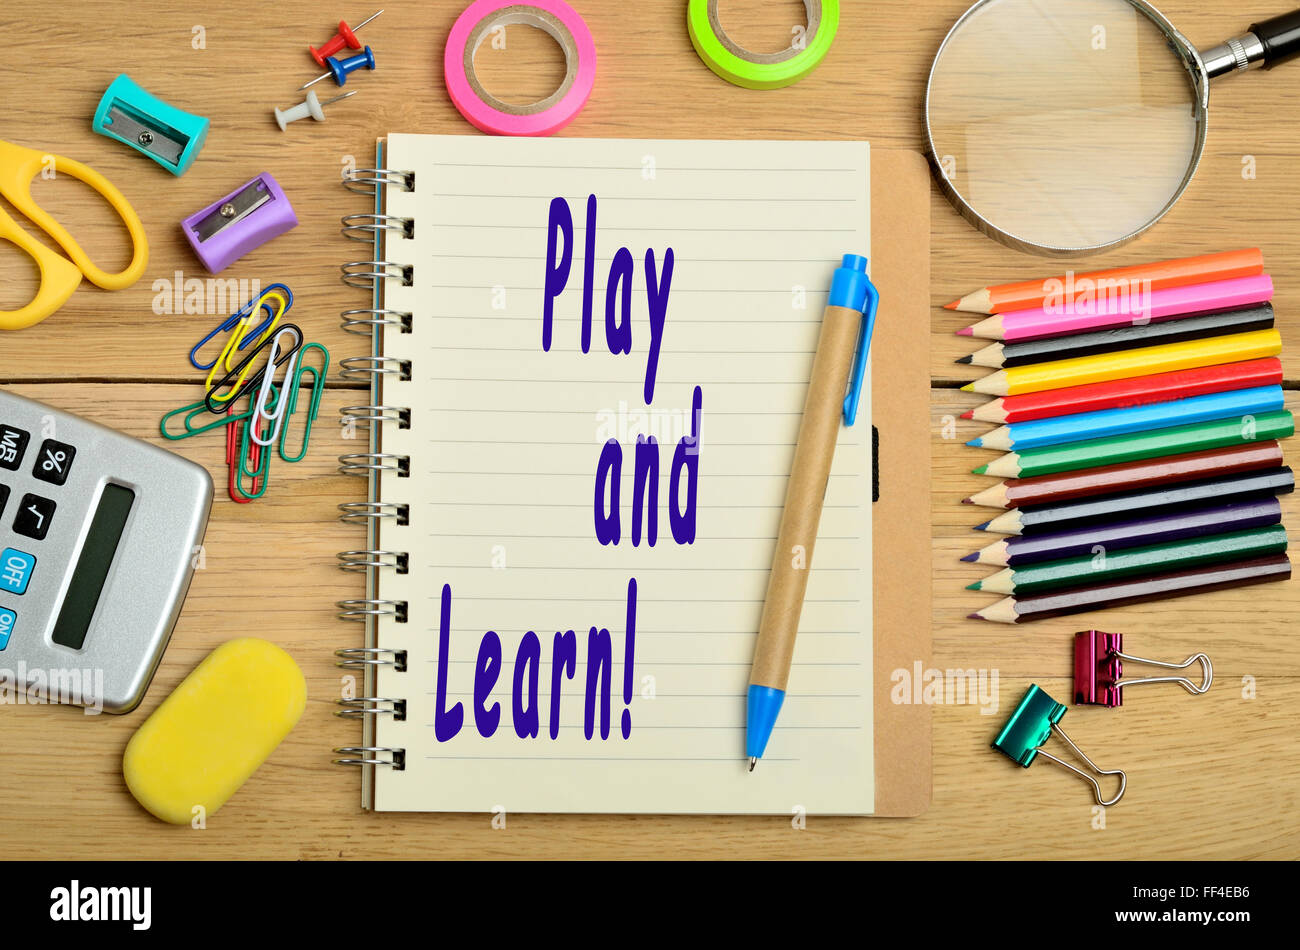 Play and learn text written on notebook Stock Photo